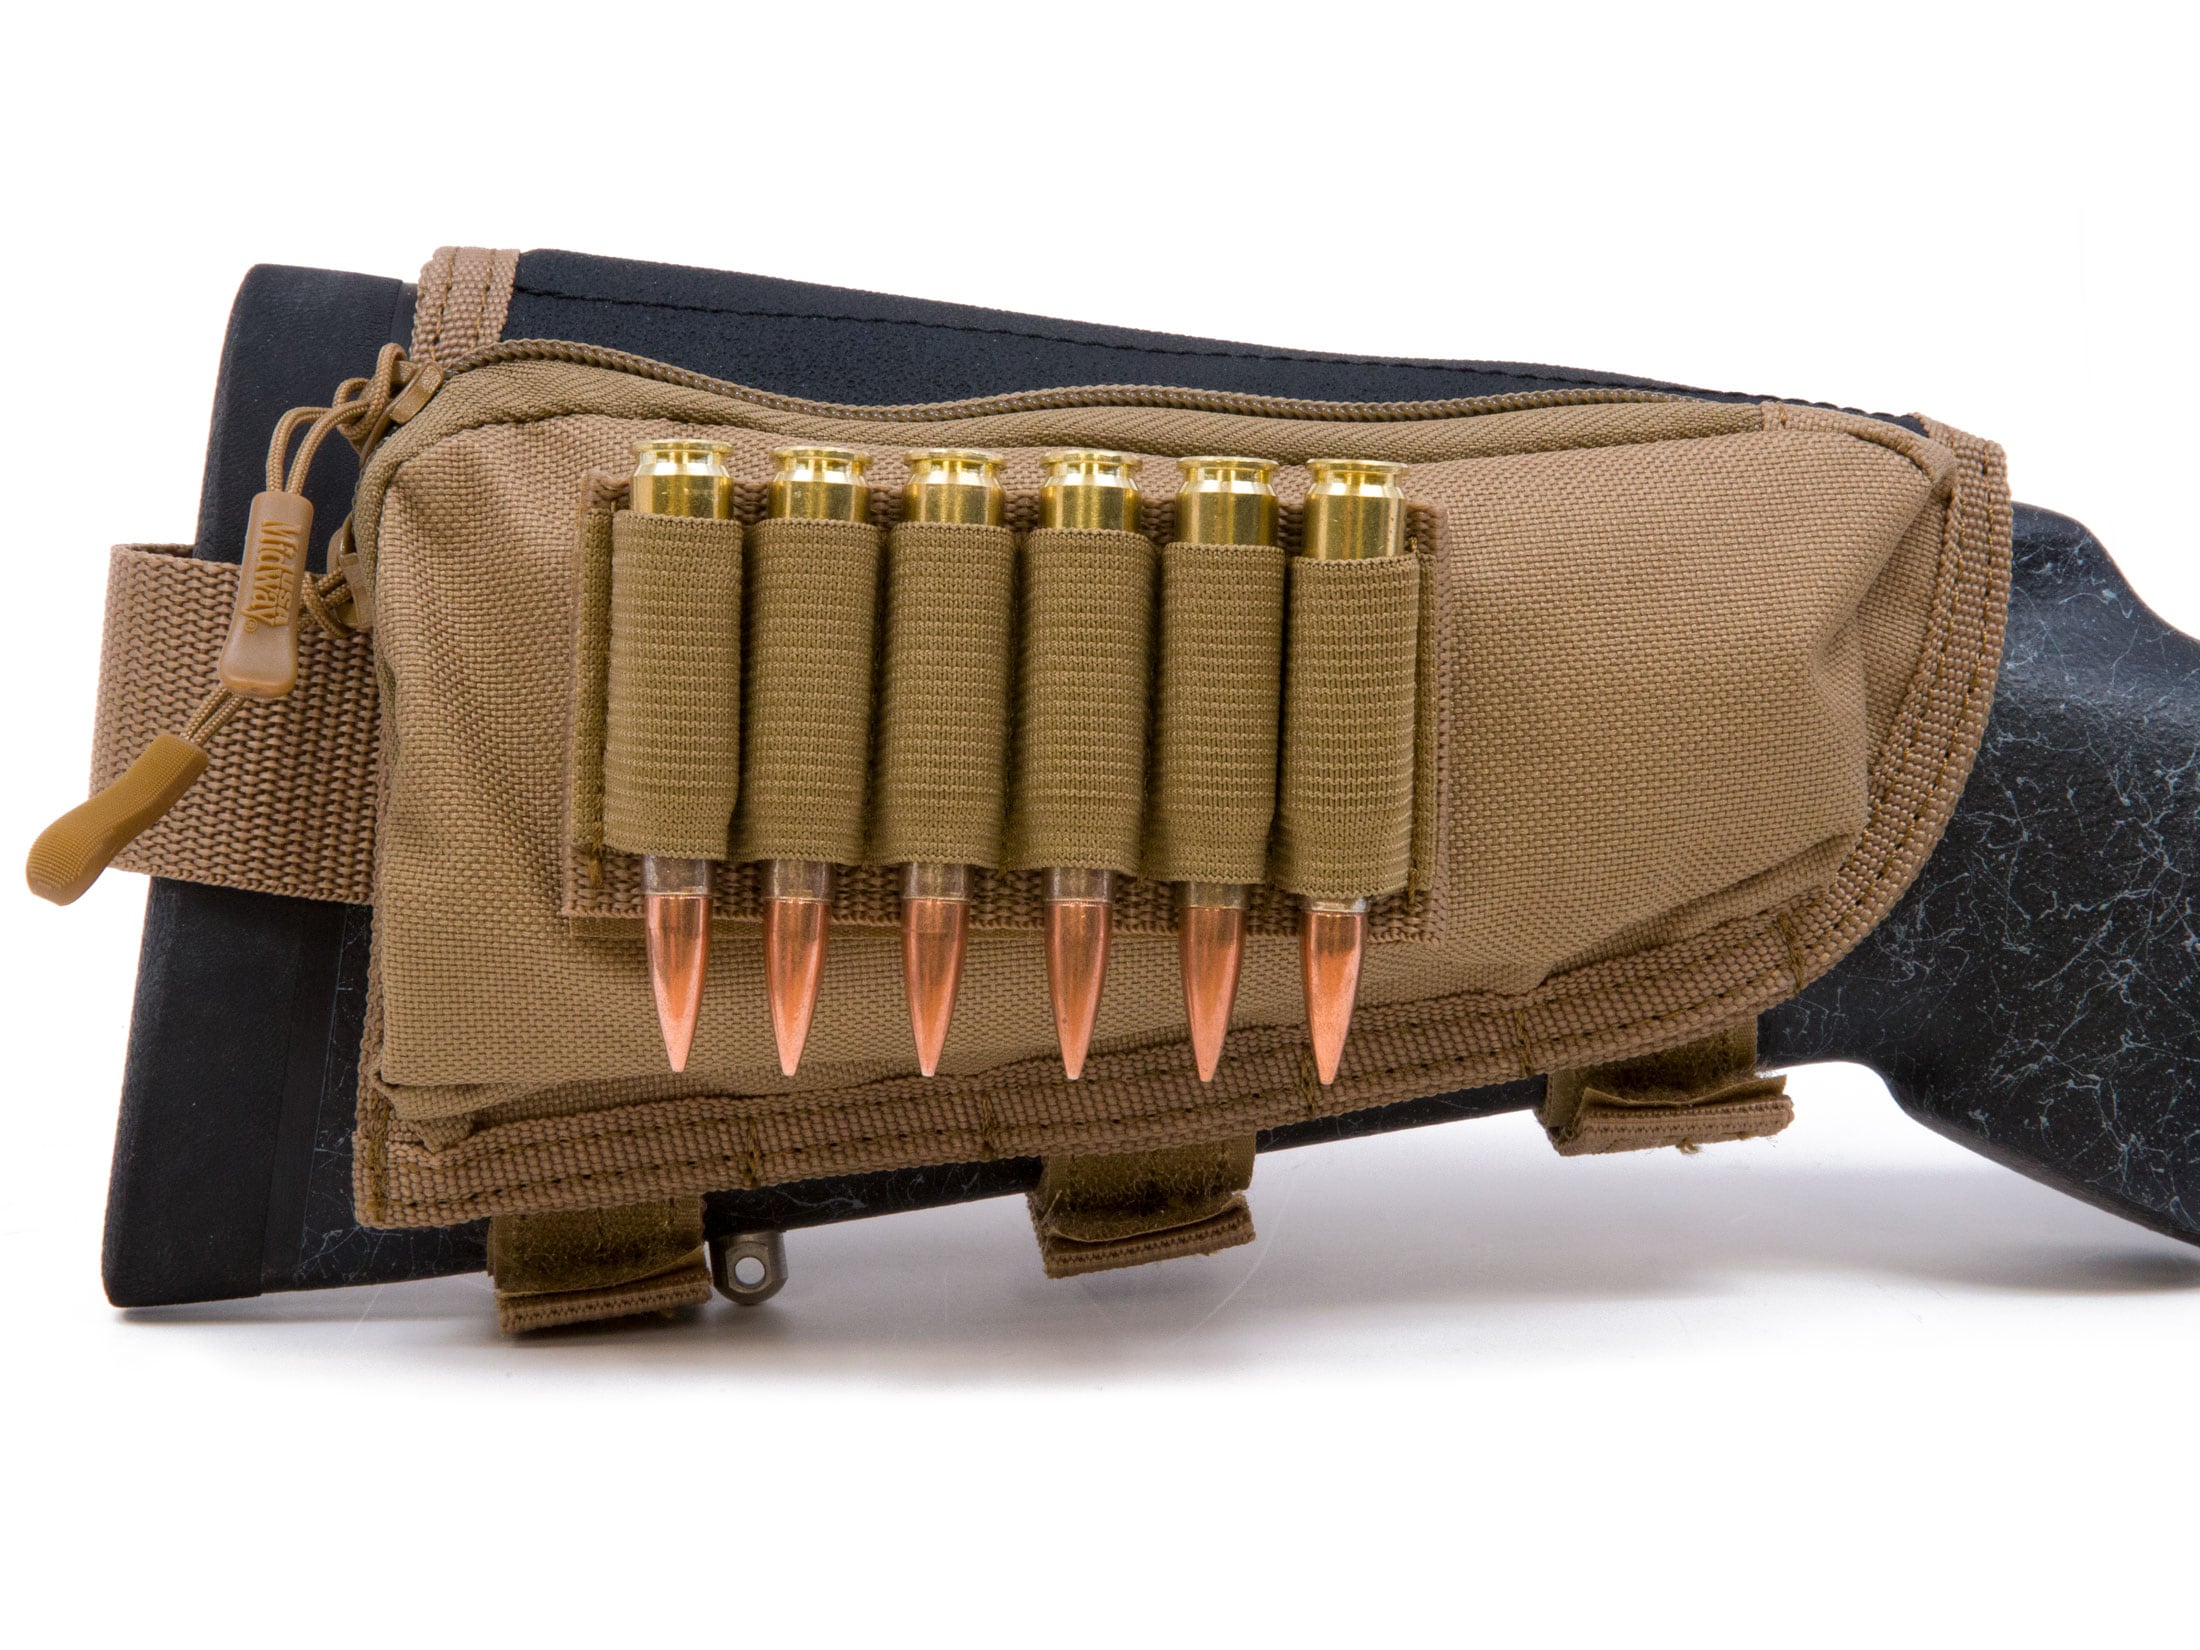 Portable Adjustable Tactical Rifle Cheek Rest Pouch Bullet Holder Nylon Ammo Bag 